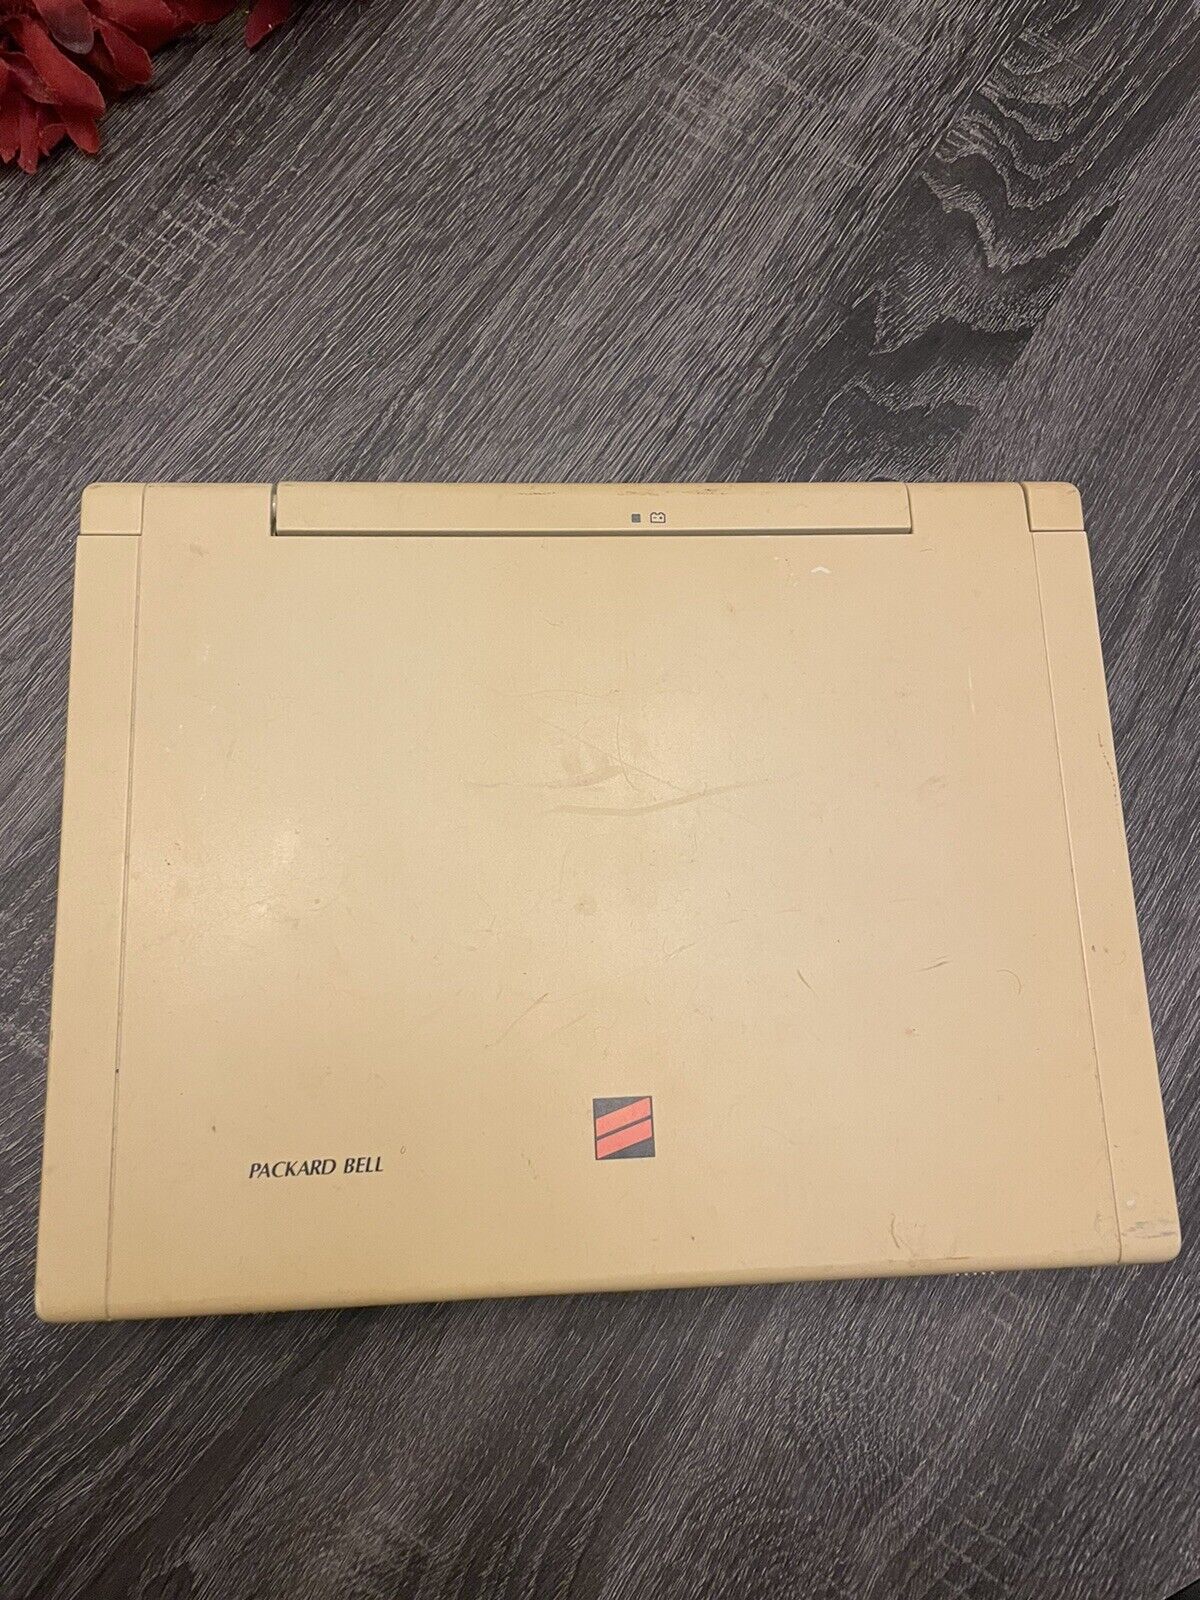 VINTAGE Packard Bell Statesman Plus 810415 No Cords/UNTESTED Laptop Computer 